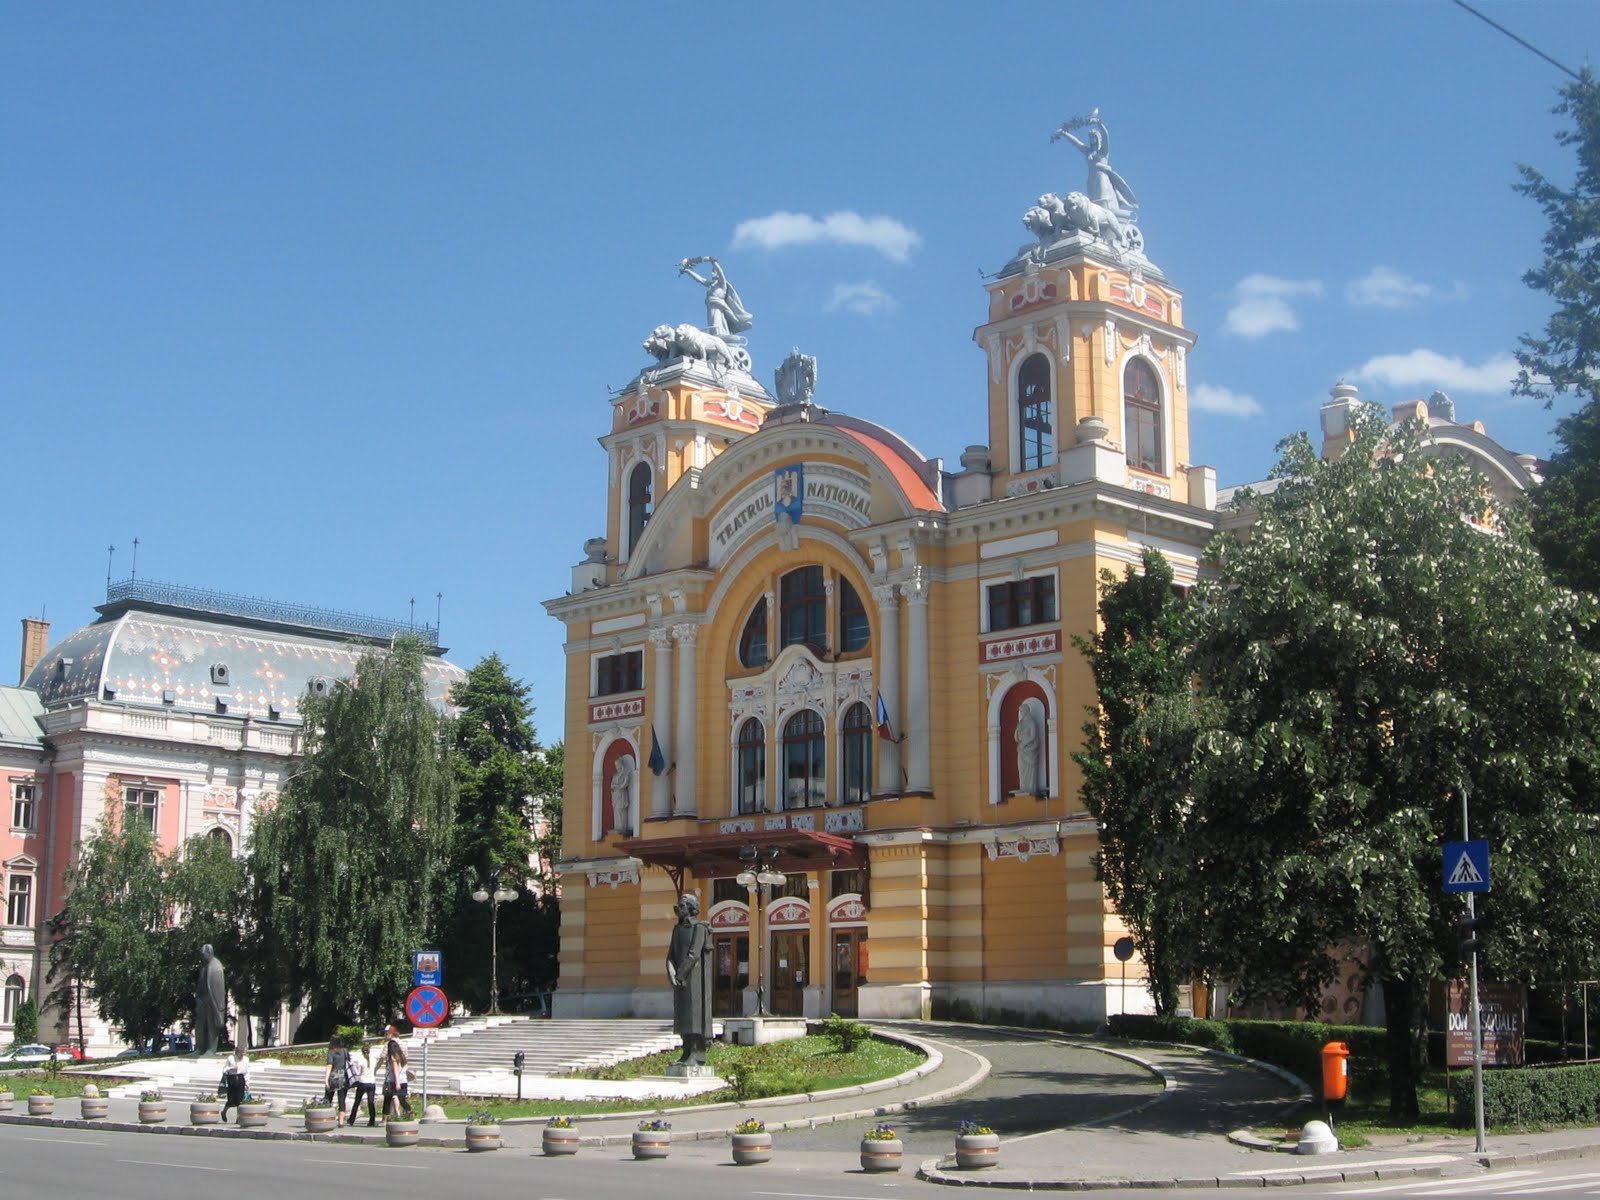 Traveller's guide to Cluj: Opera House and National Theatre of Cluj